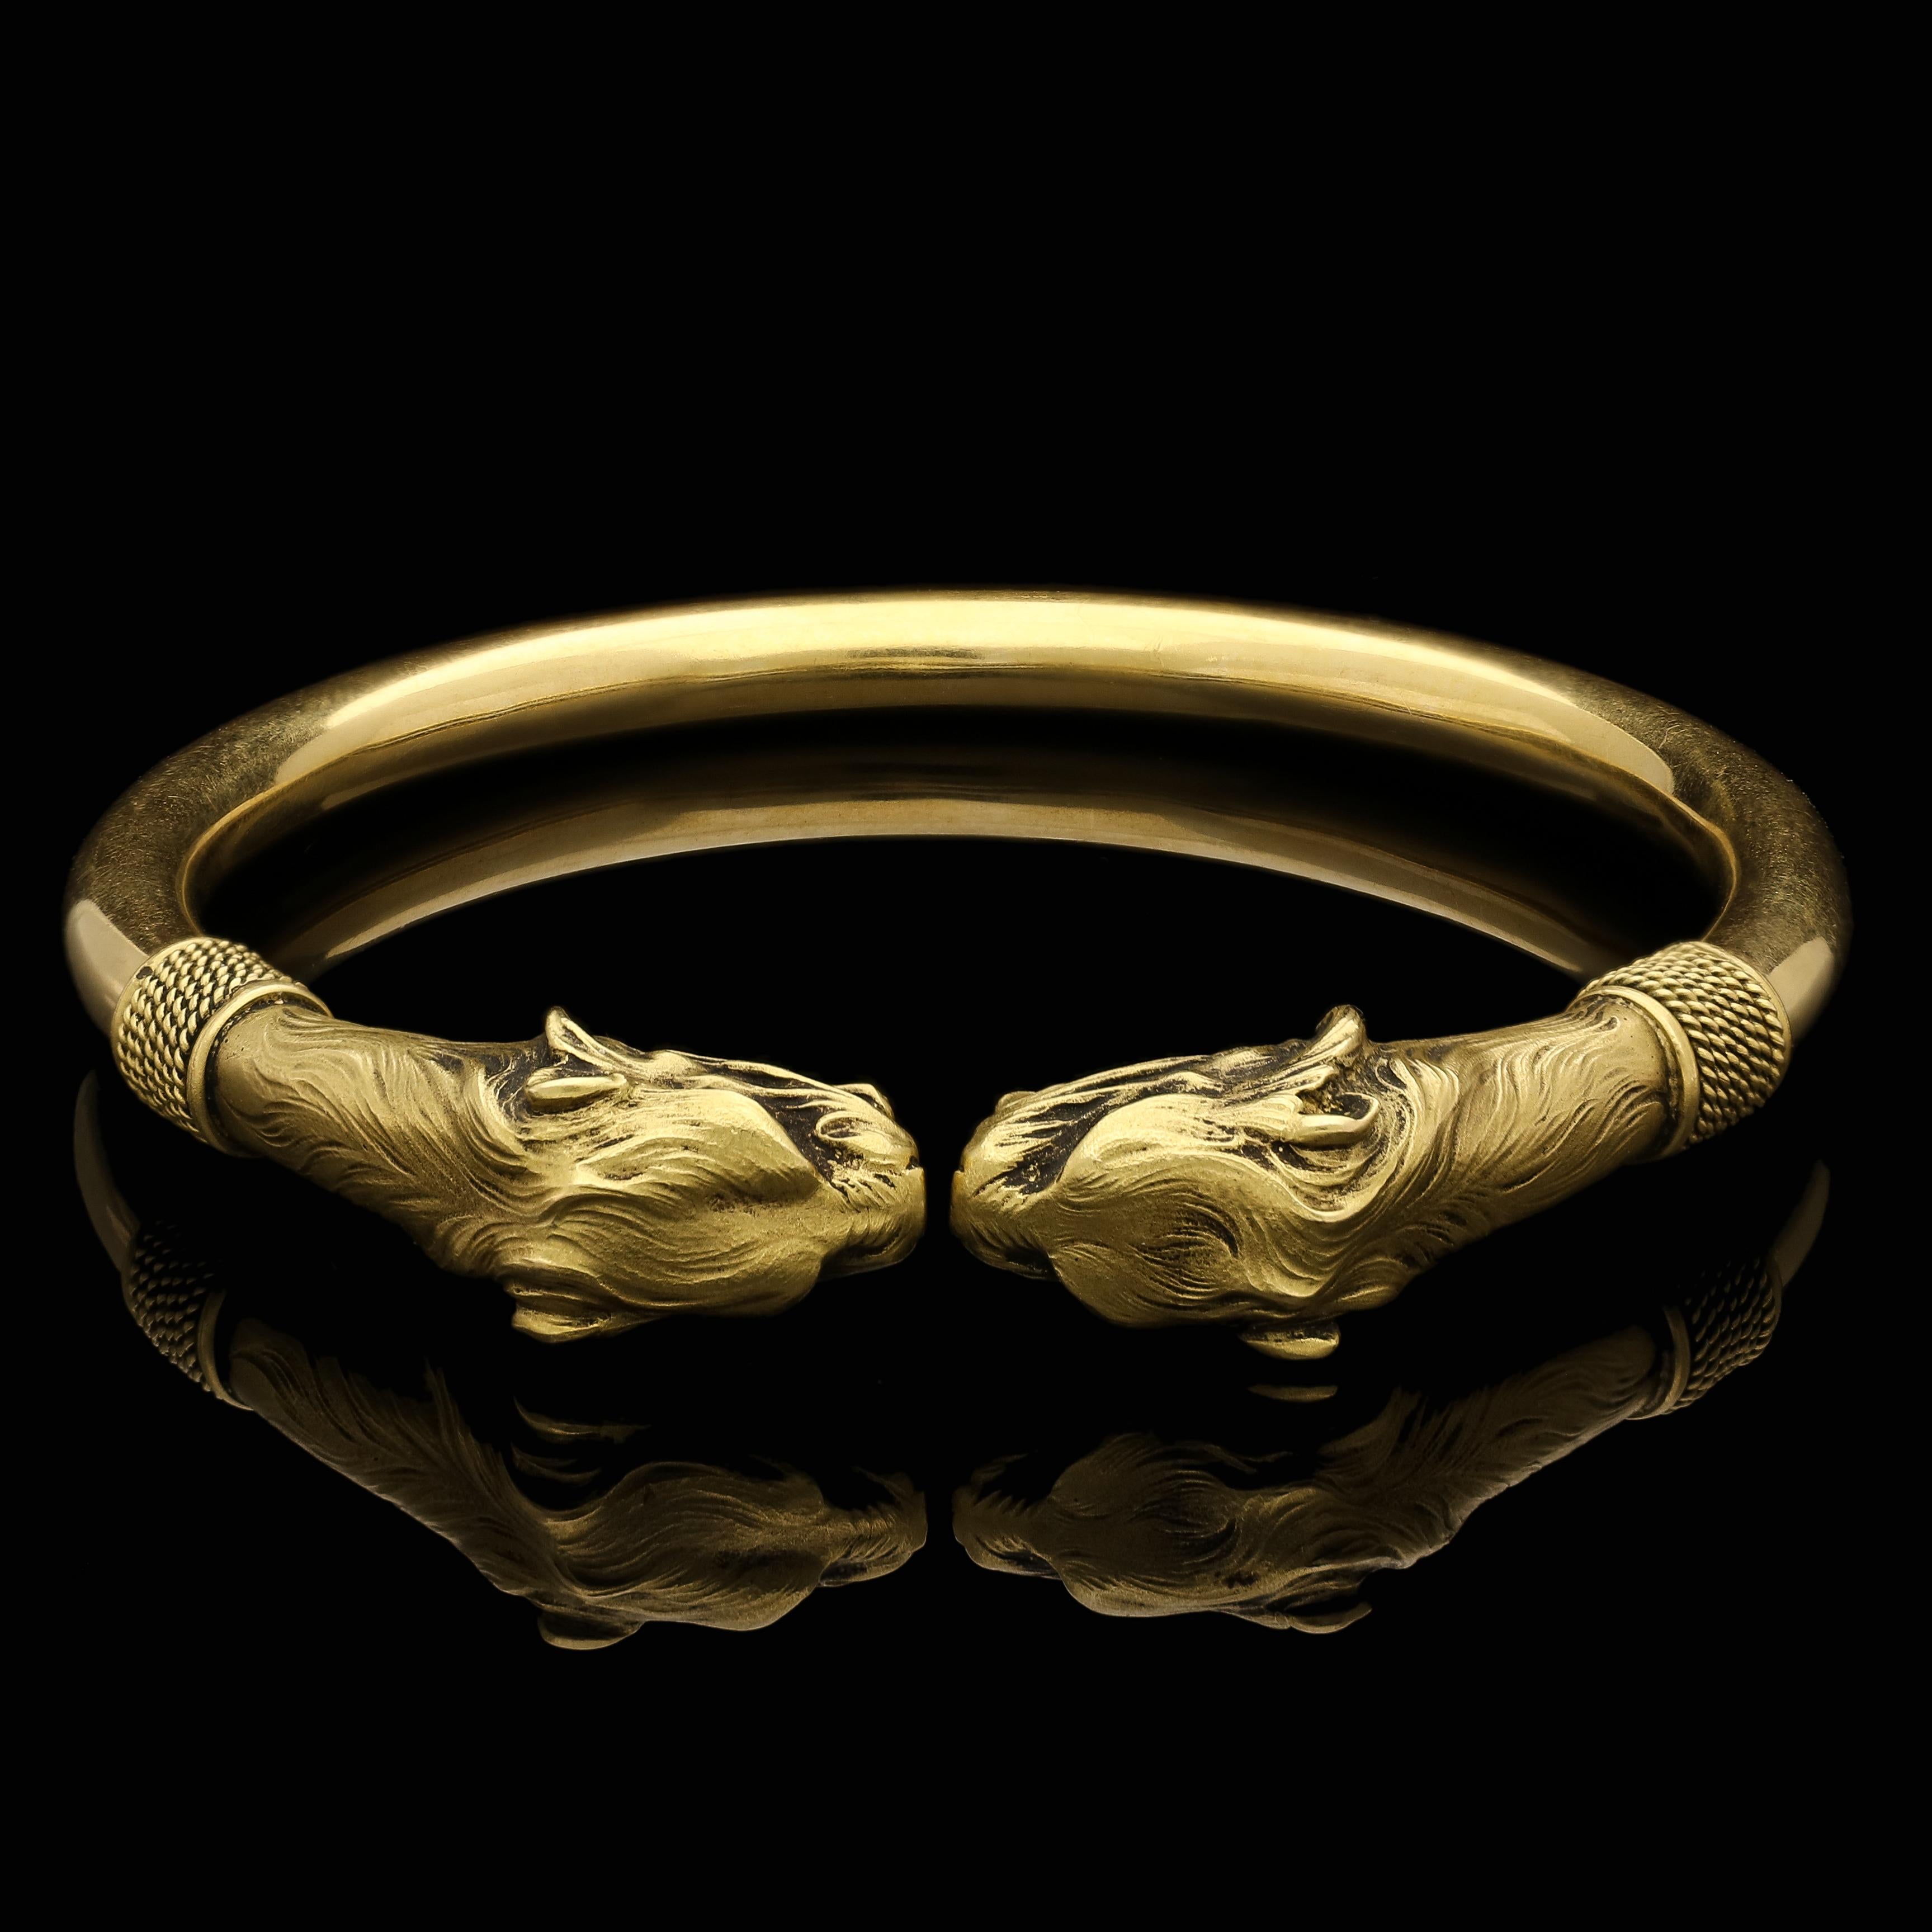 Description
An antique French gold lion head bangle c.1890s, designed as a solid bangle in 18ct yellow gold with rounded profile and small opening, each end terminated by a finely modelled lion head with open roaring mouth, sharp teeth, hooded eyes